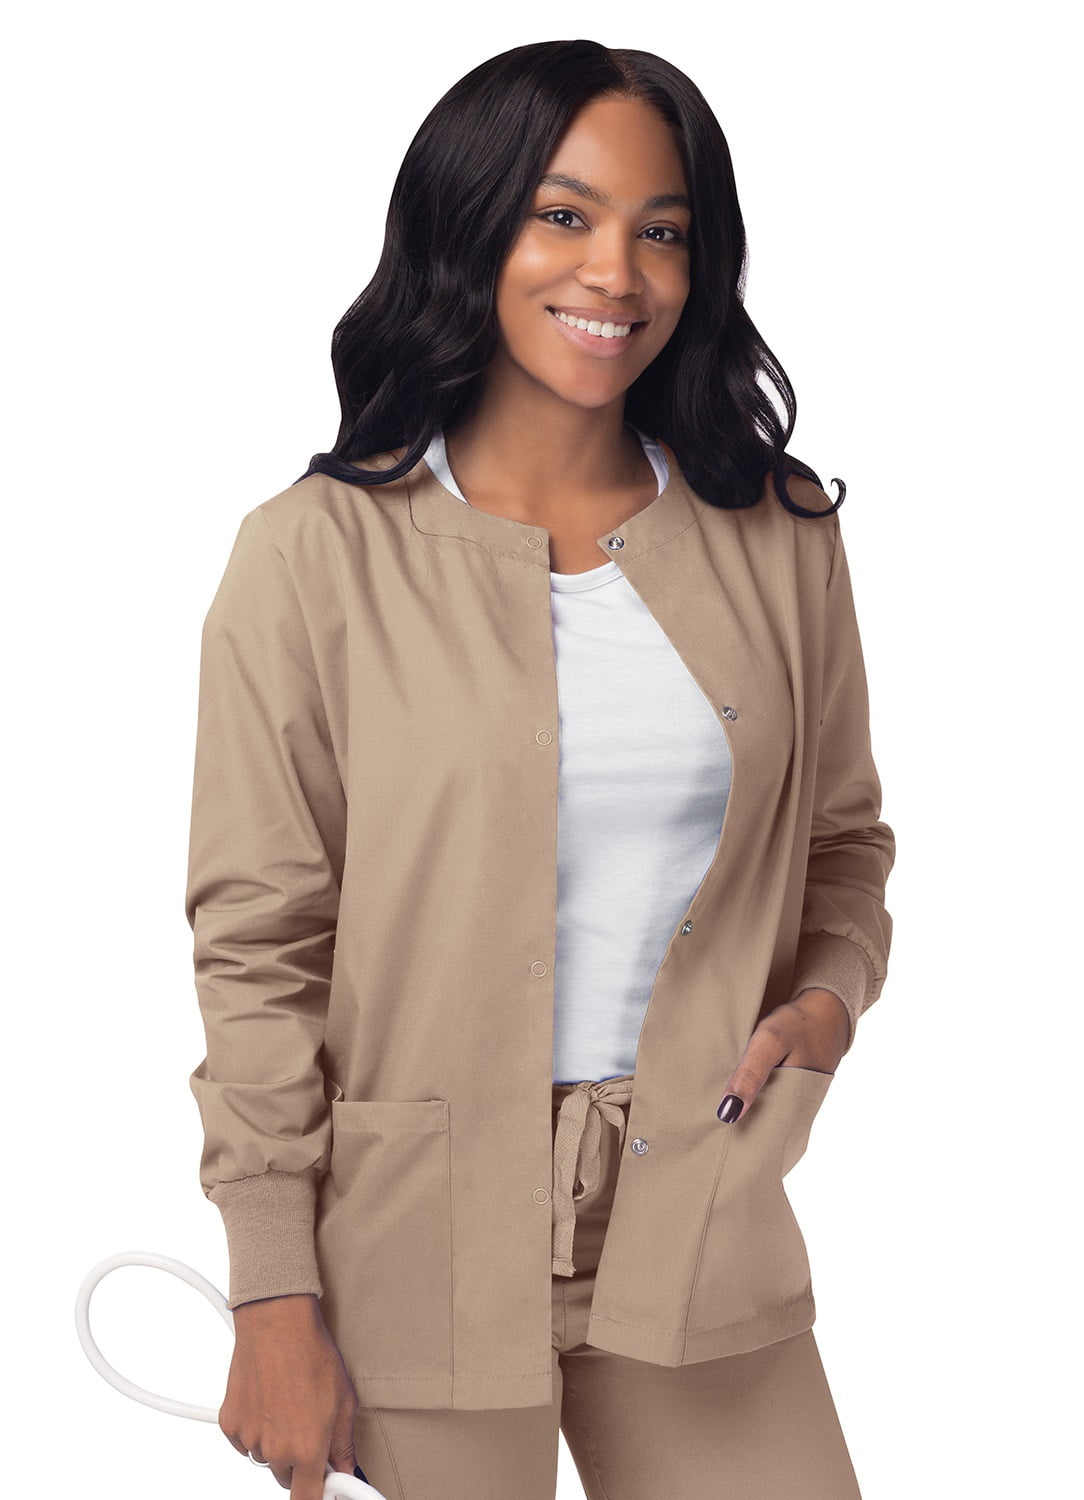 Up Jacket Front Snap Warm SIVVAN Scrubs for Women